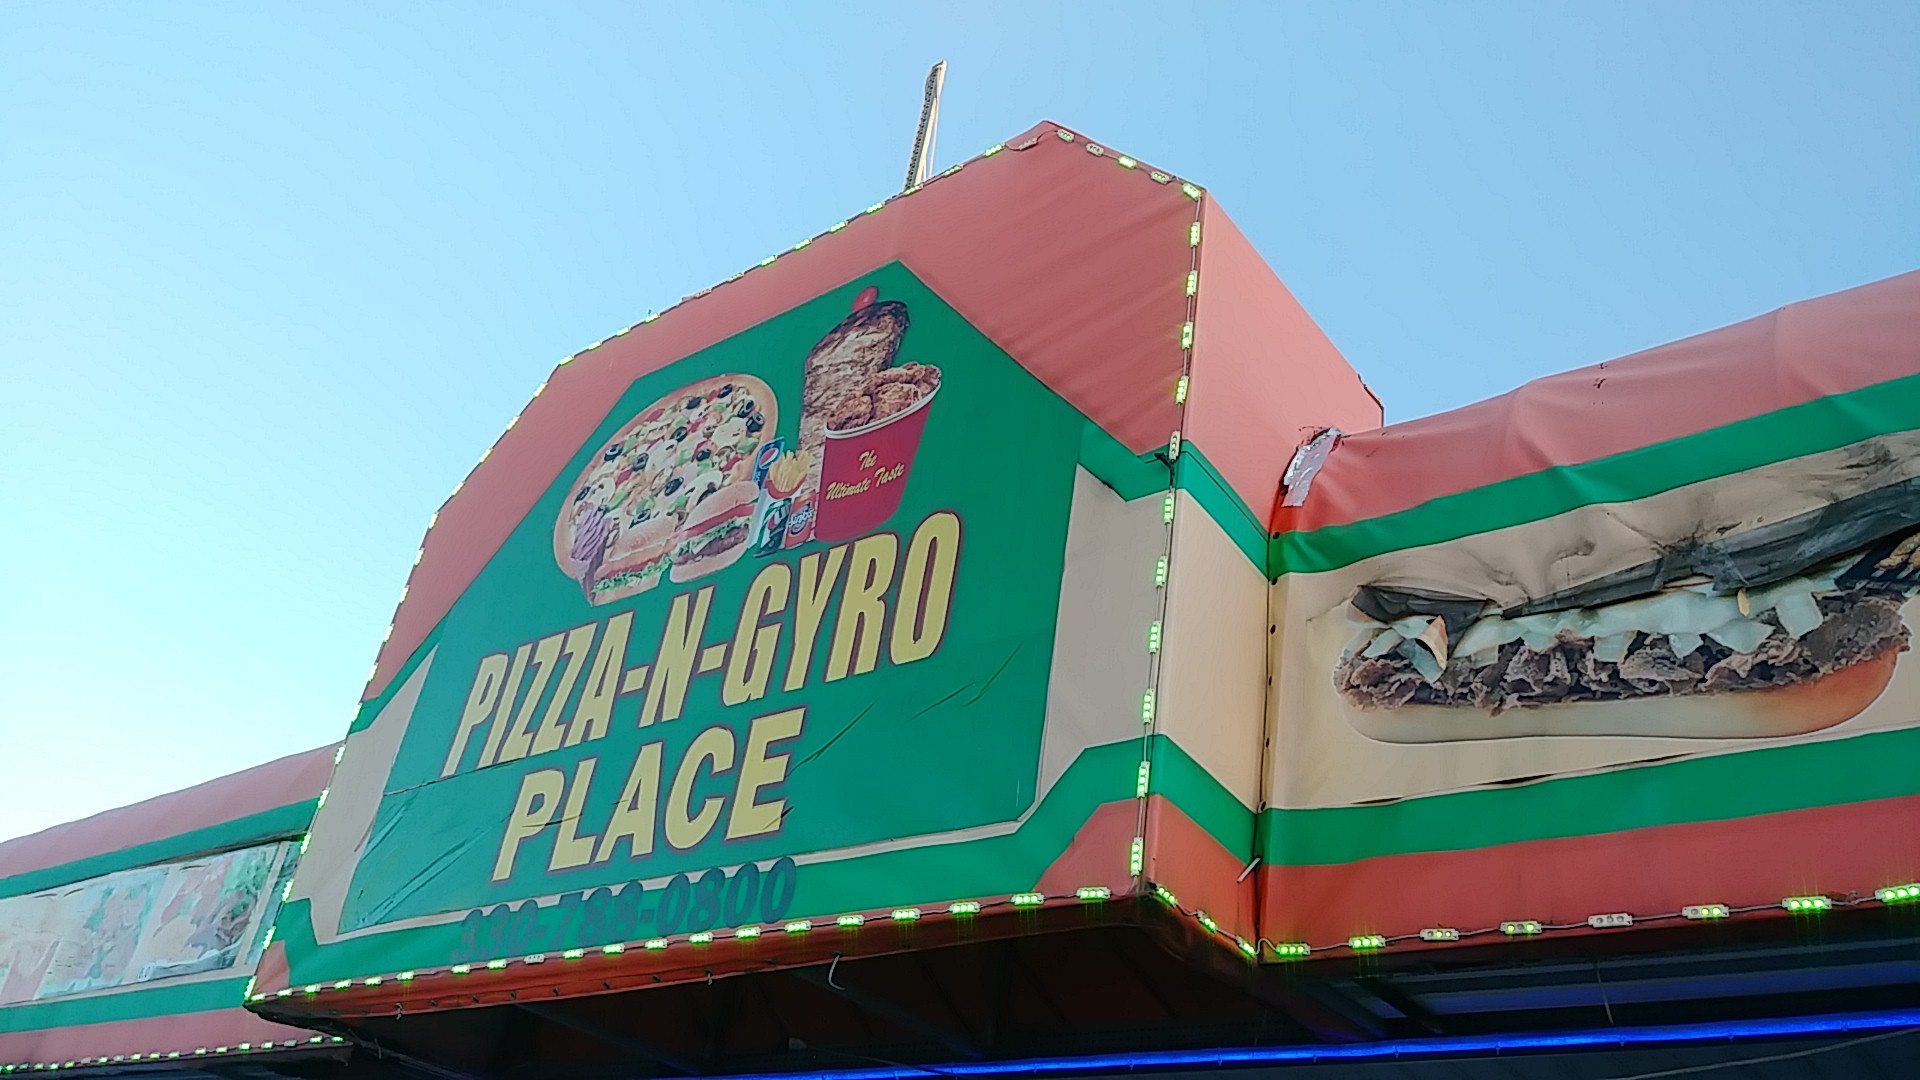 Pizza N Gyro Place